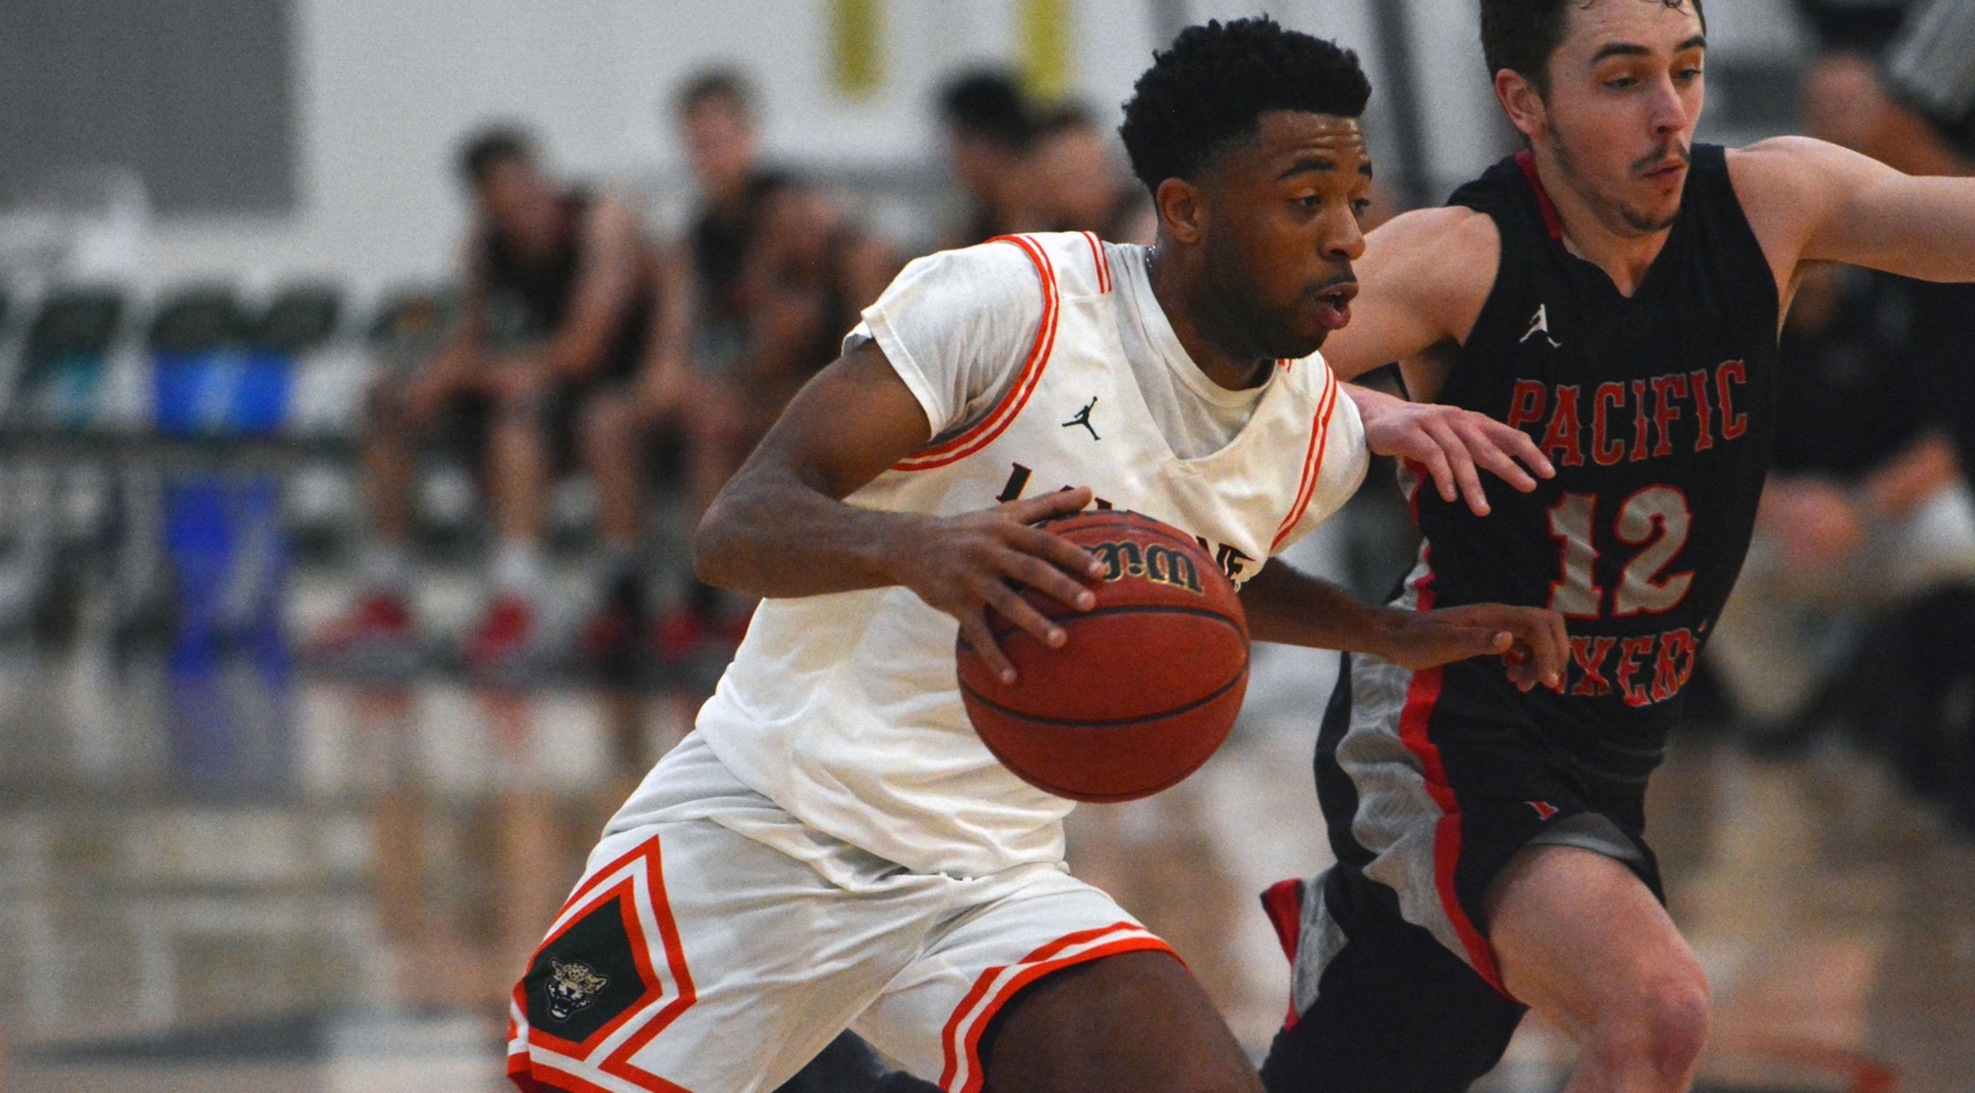 Men's Basketball falls to Whittier on the road